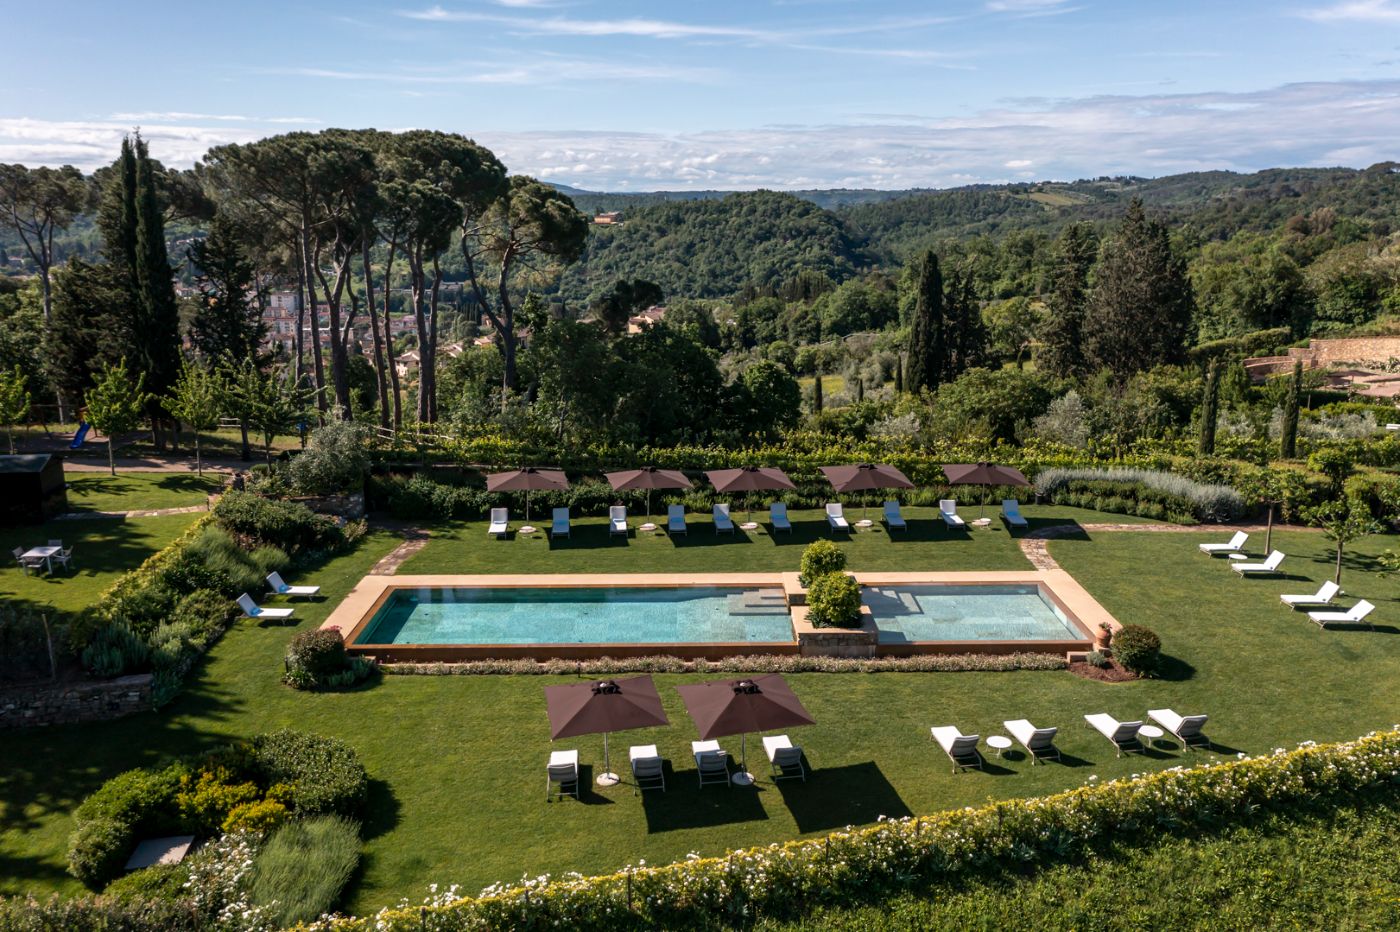 The pool area at Castel_Botticelli.